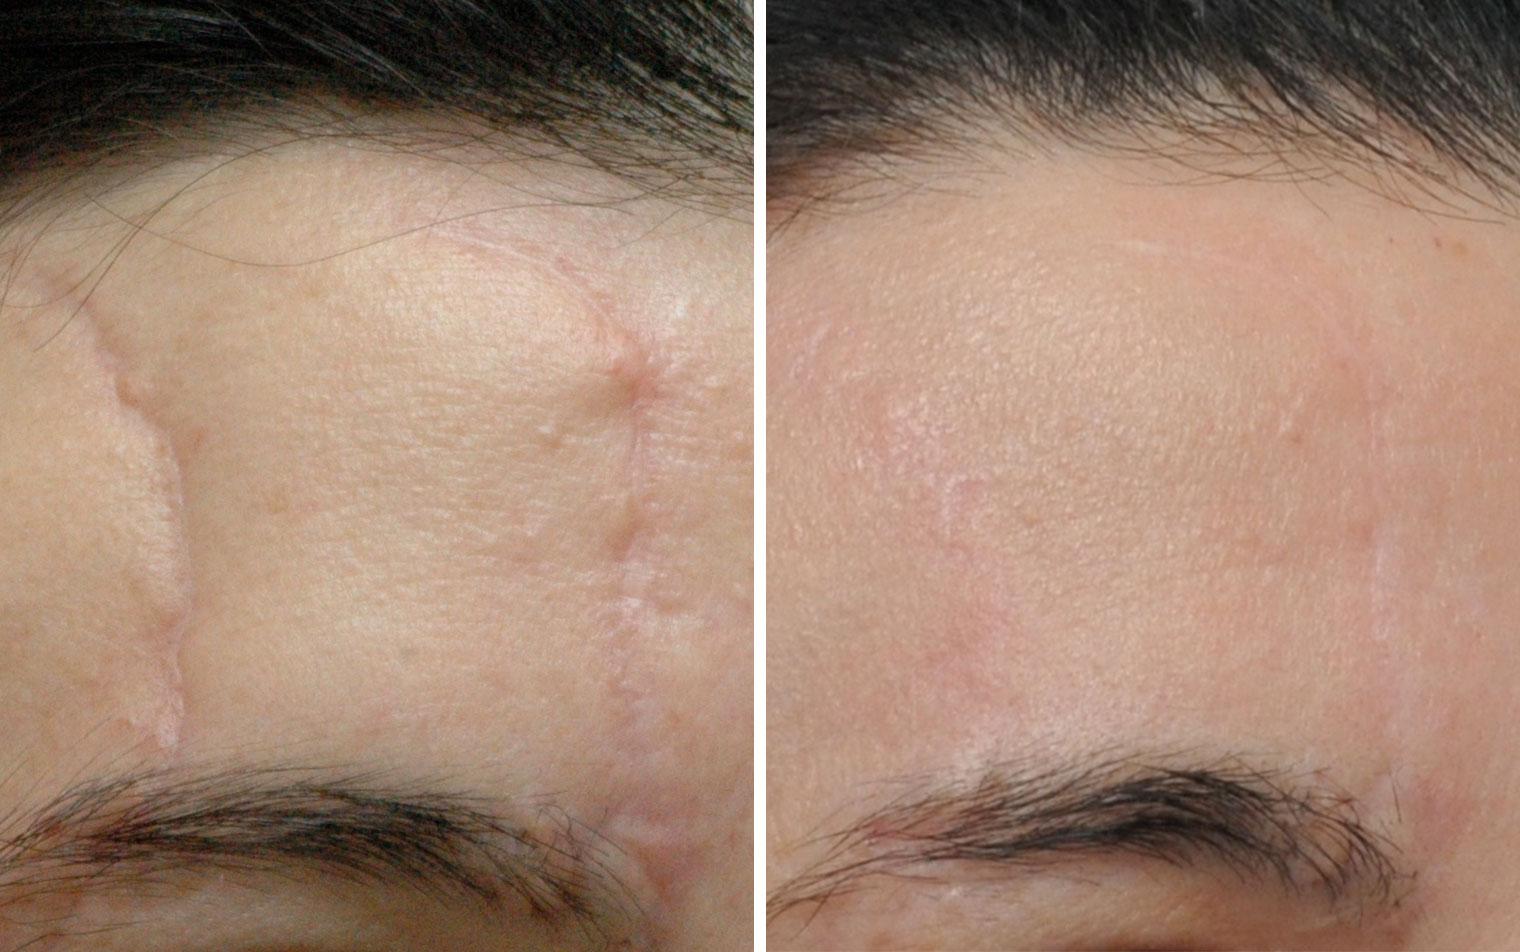 best of Reconstructive surgery scars Facial